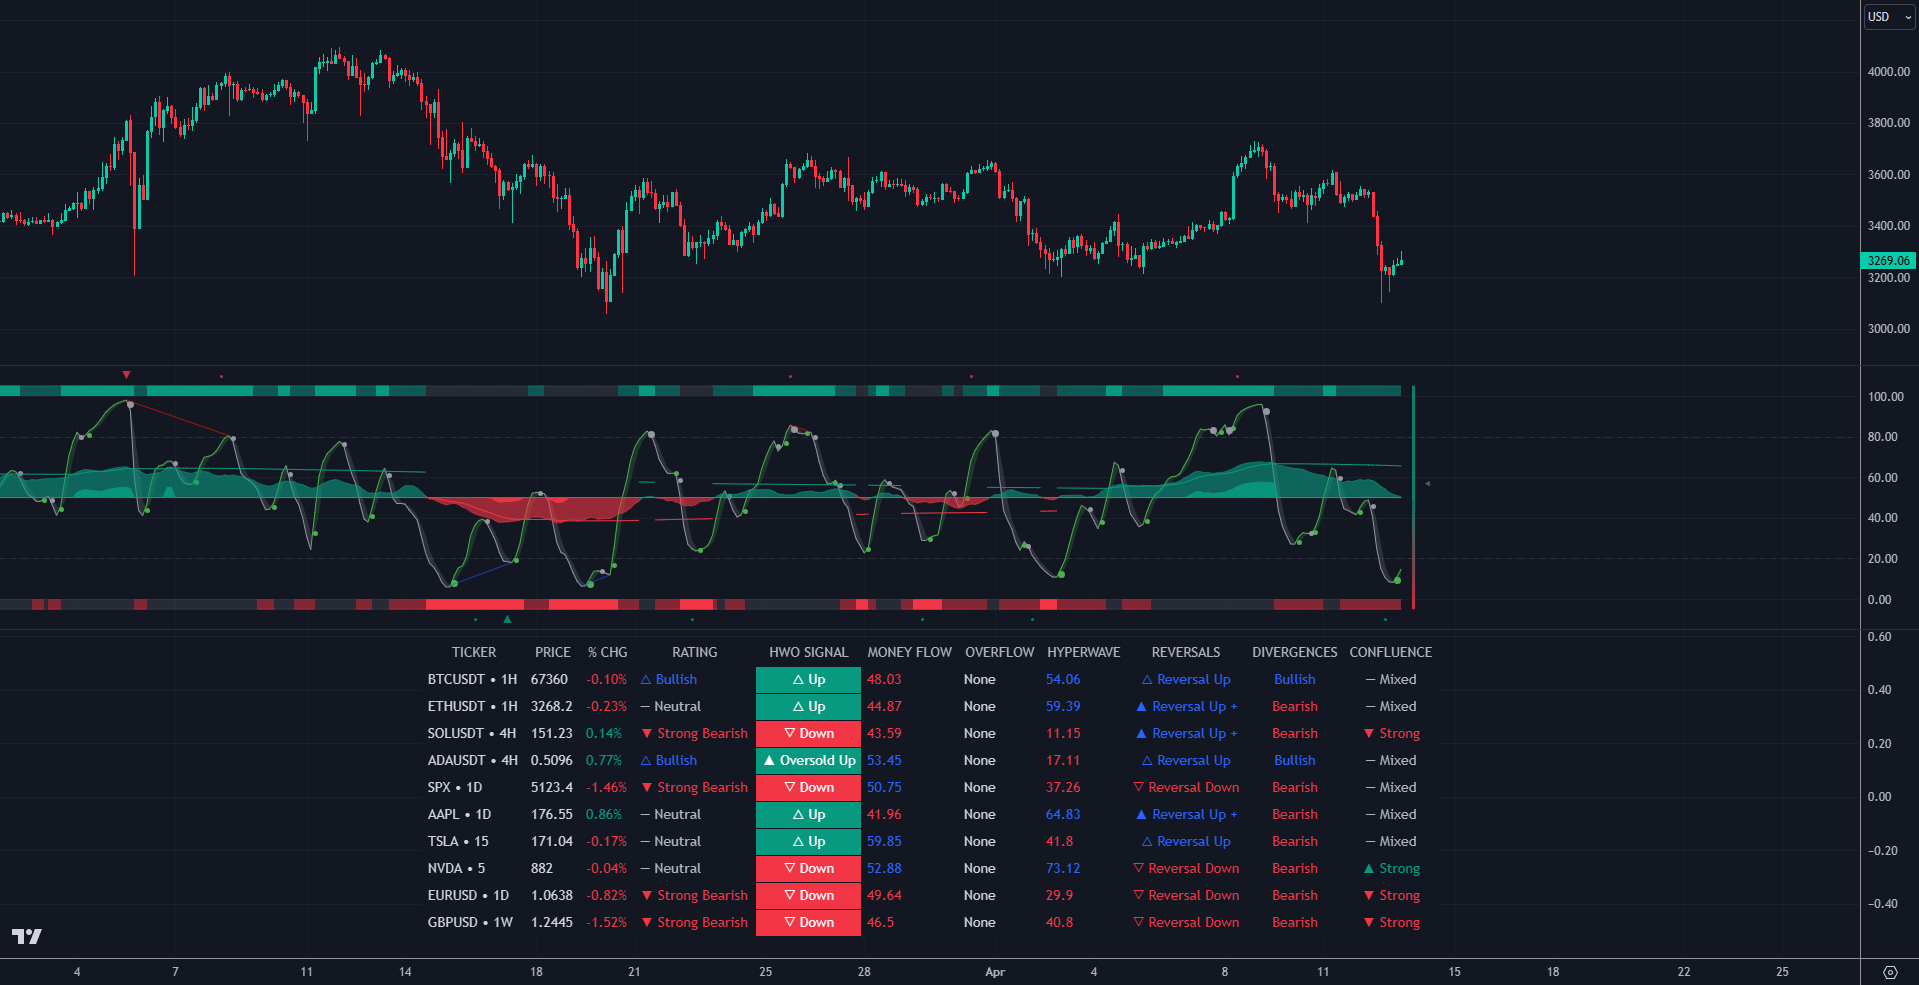 LuxAlgo trading charts showing screeners with scanning functionalities